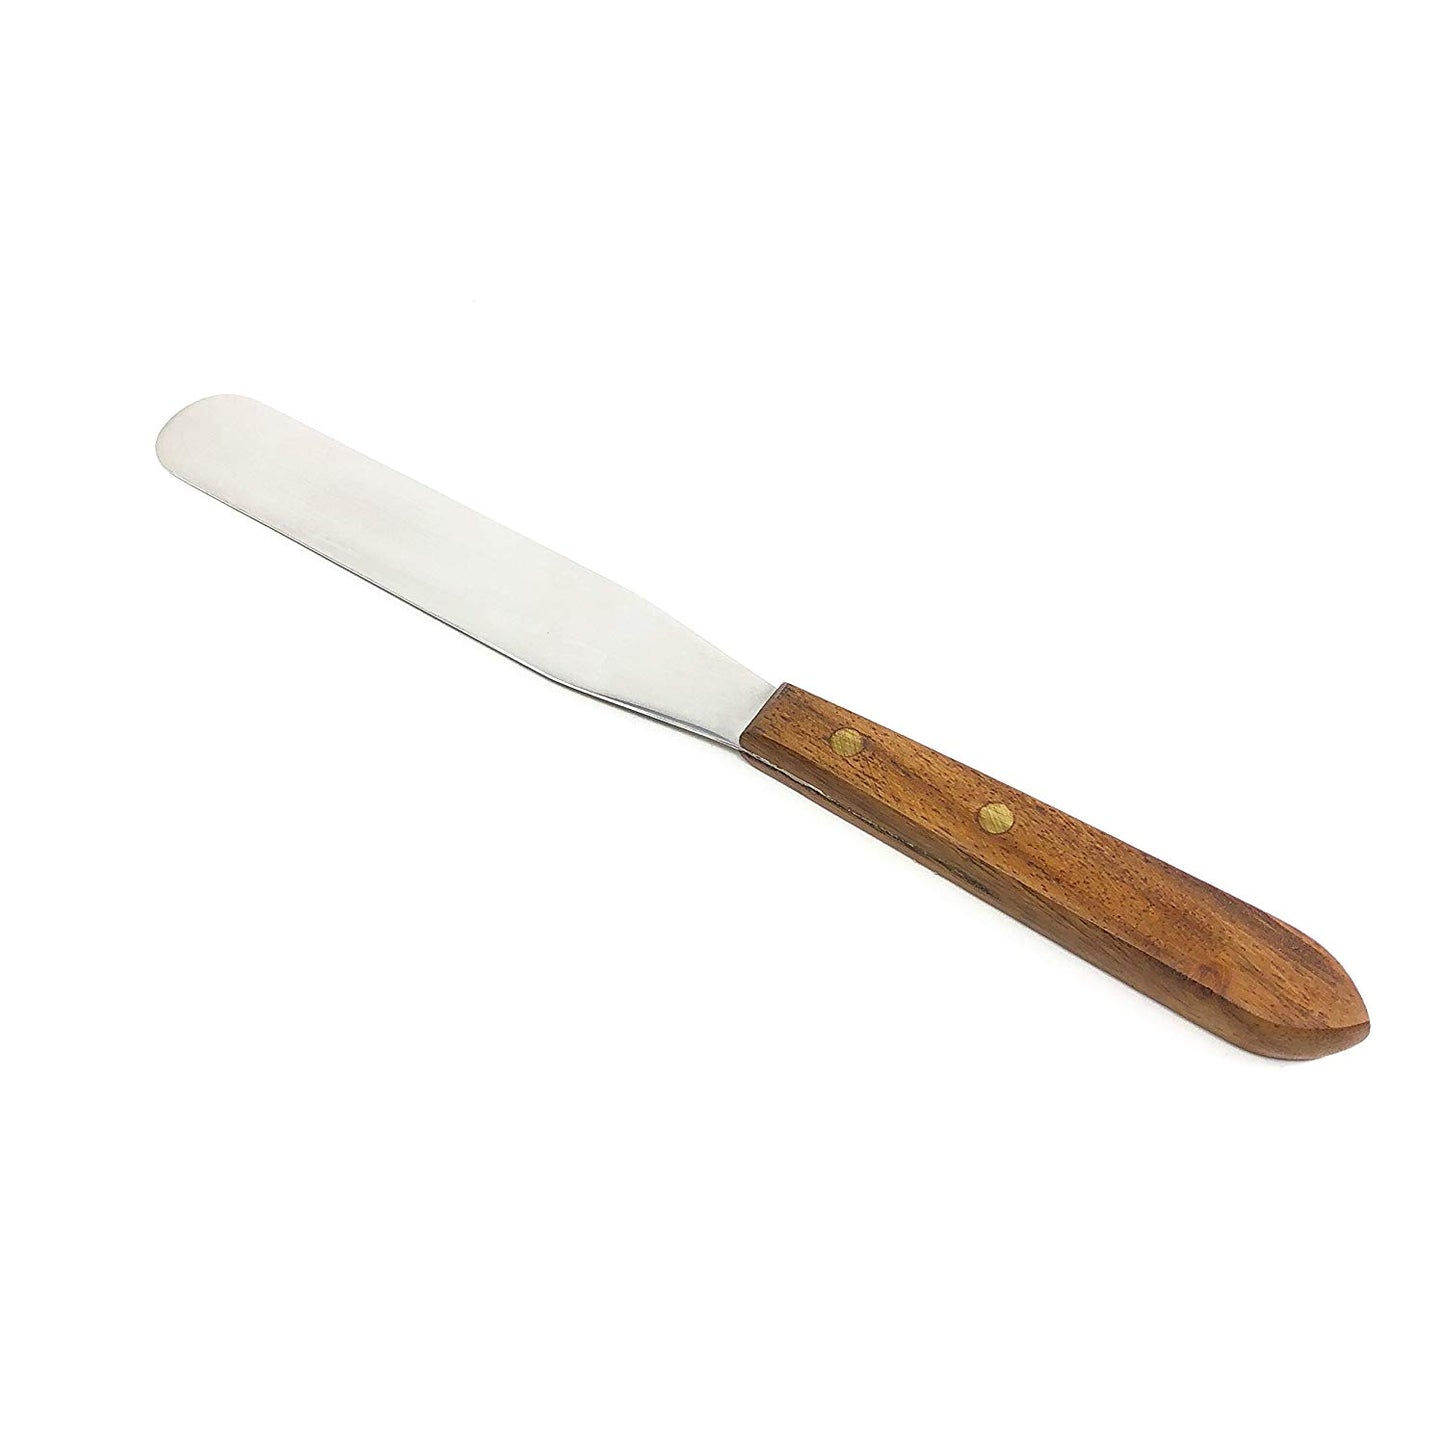 IMS-WHSPT8 Lab Spatula Wooden Handle, 8" Stainless Steel Blade, Brass Rivets